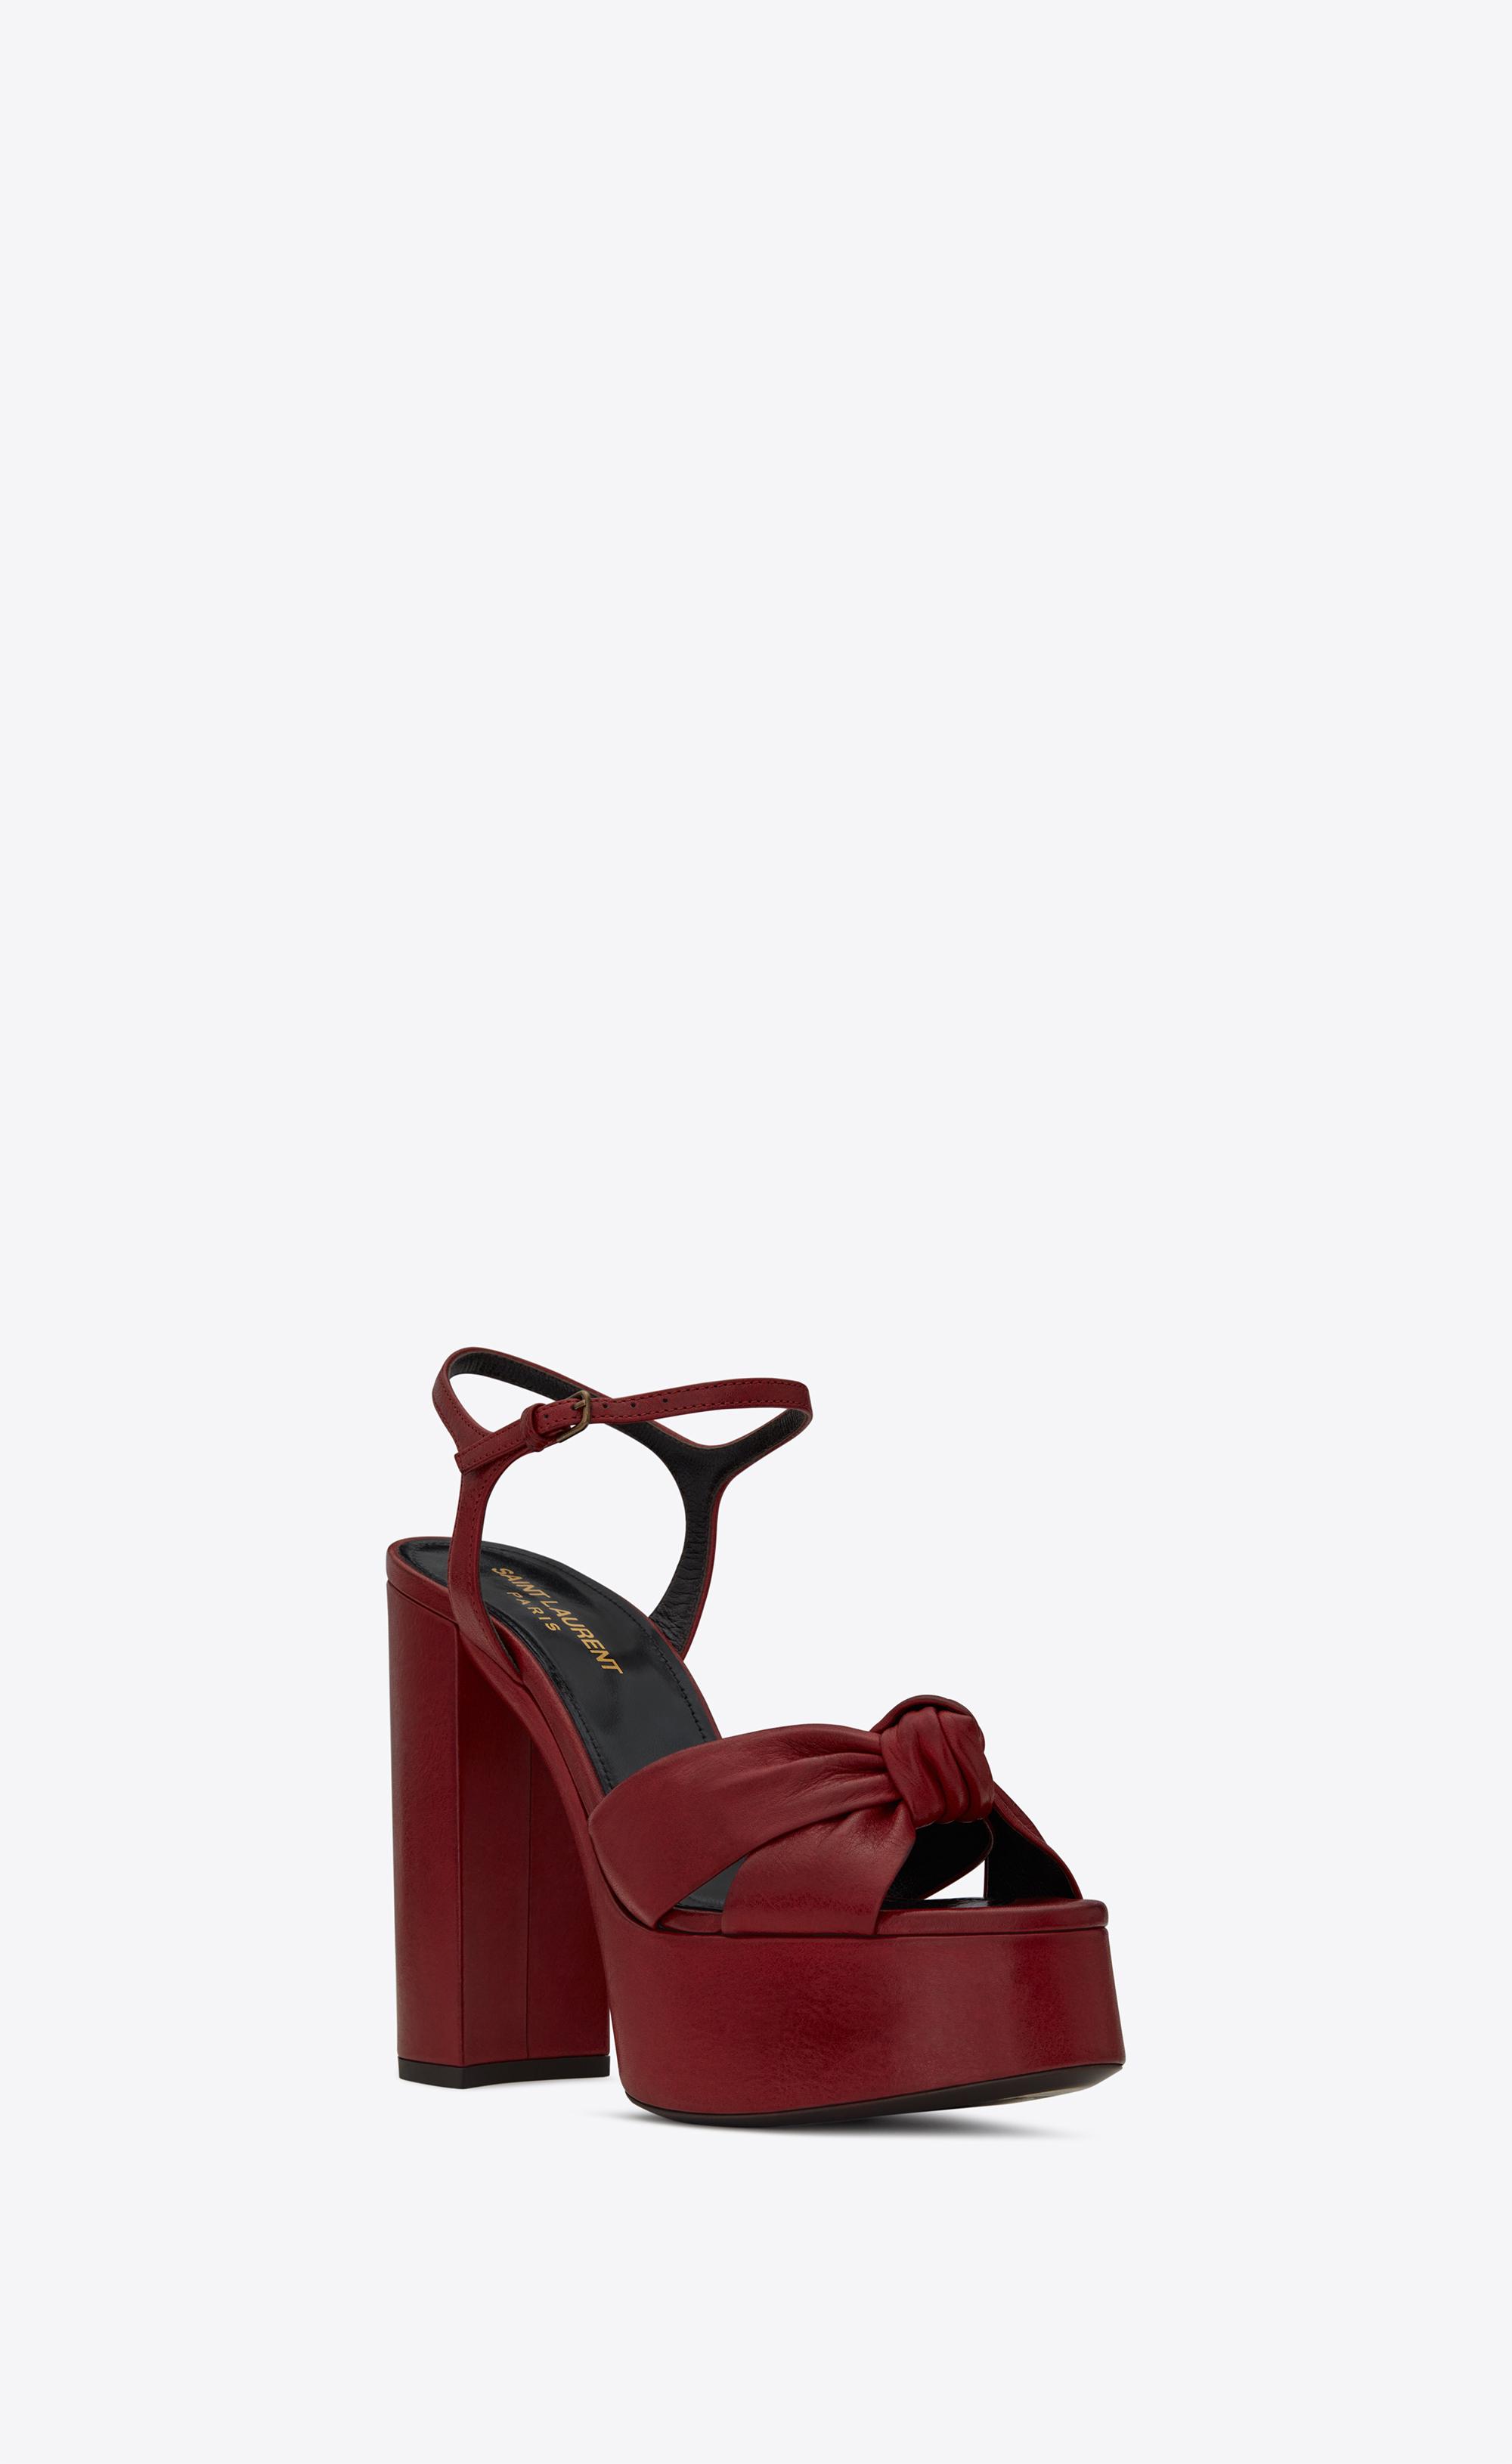 Saint Laurent Bianca Sandals In Smooth Leather in Dark Red (Red) - Lyst